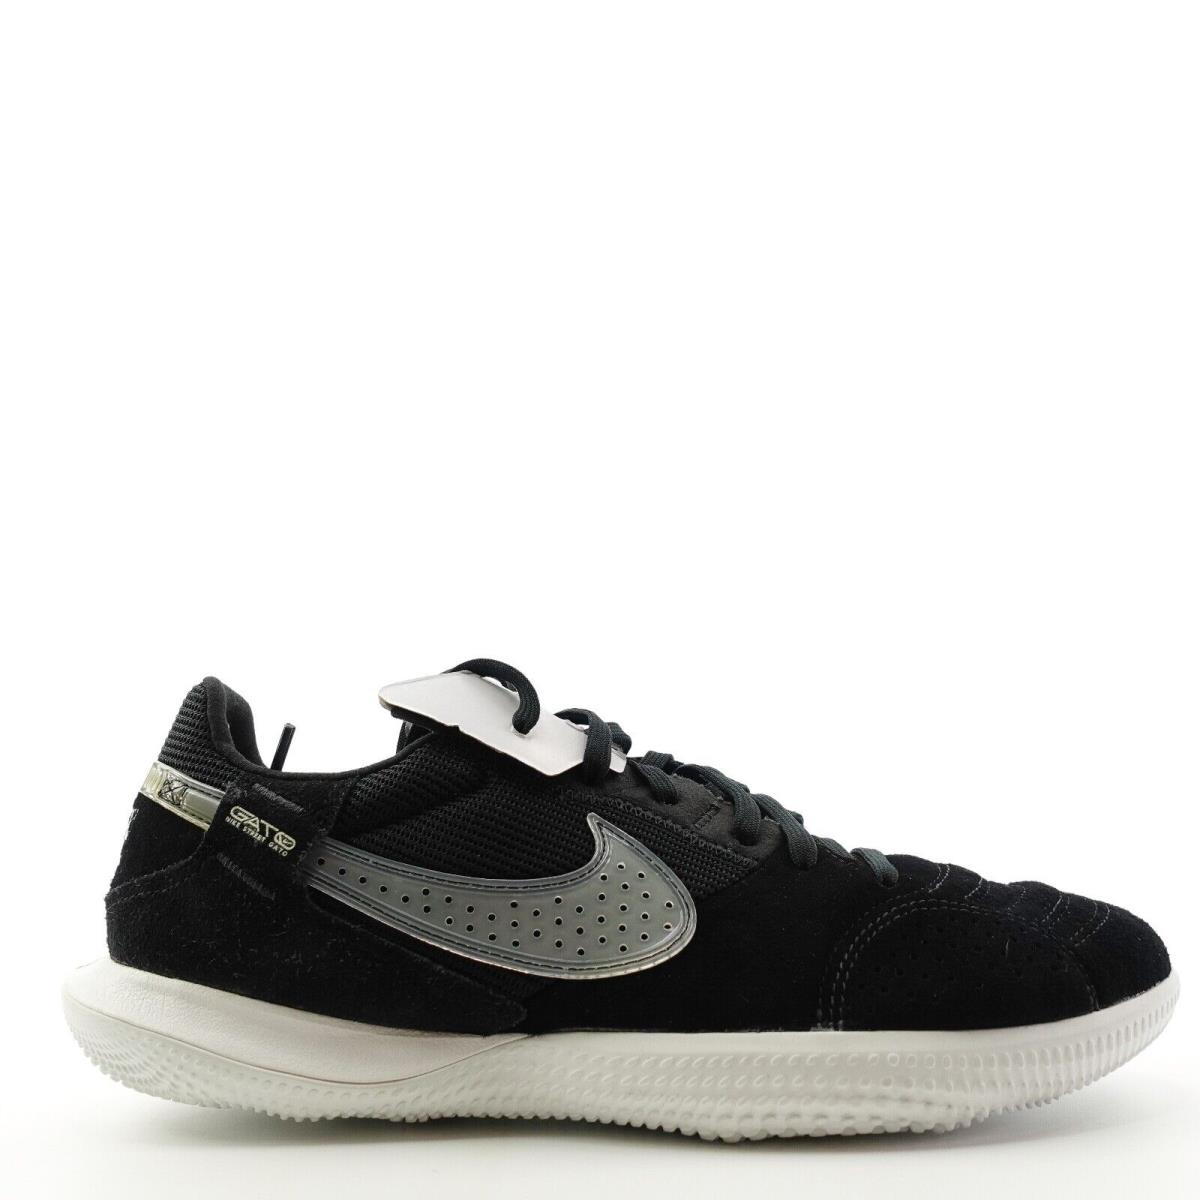 Nike Streetgato Black Summit White Mens Indoor Soccer Shoes Low Top DC8466-010 11